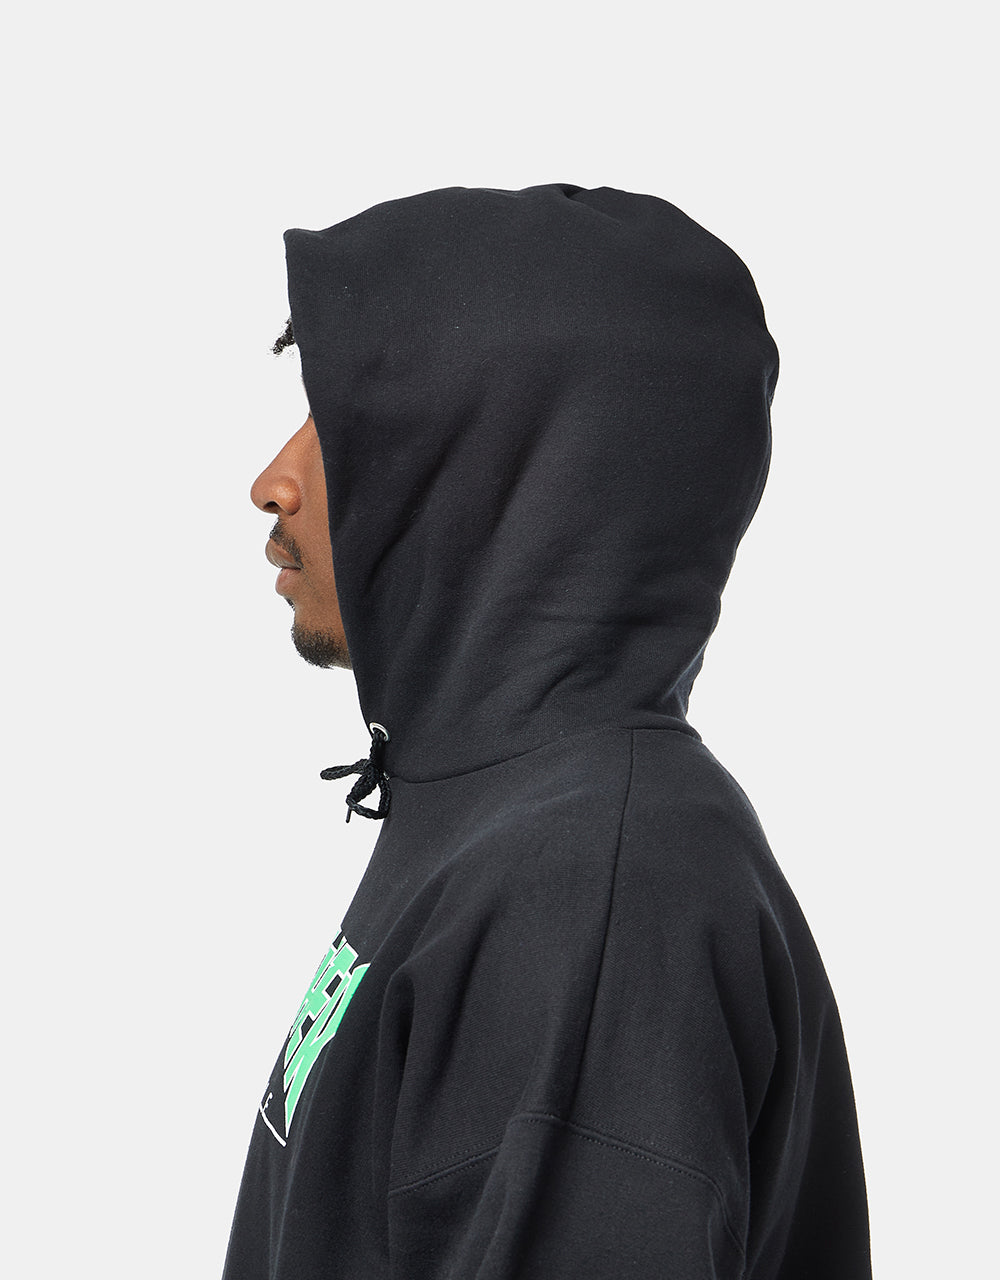 Thrasher Outlined Pullover Hoodie - Black/Green